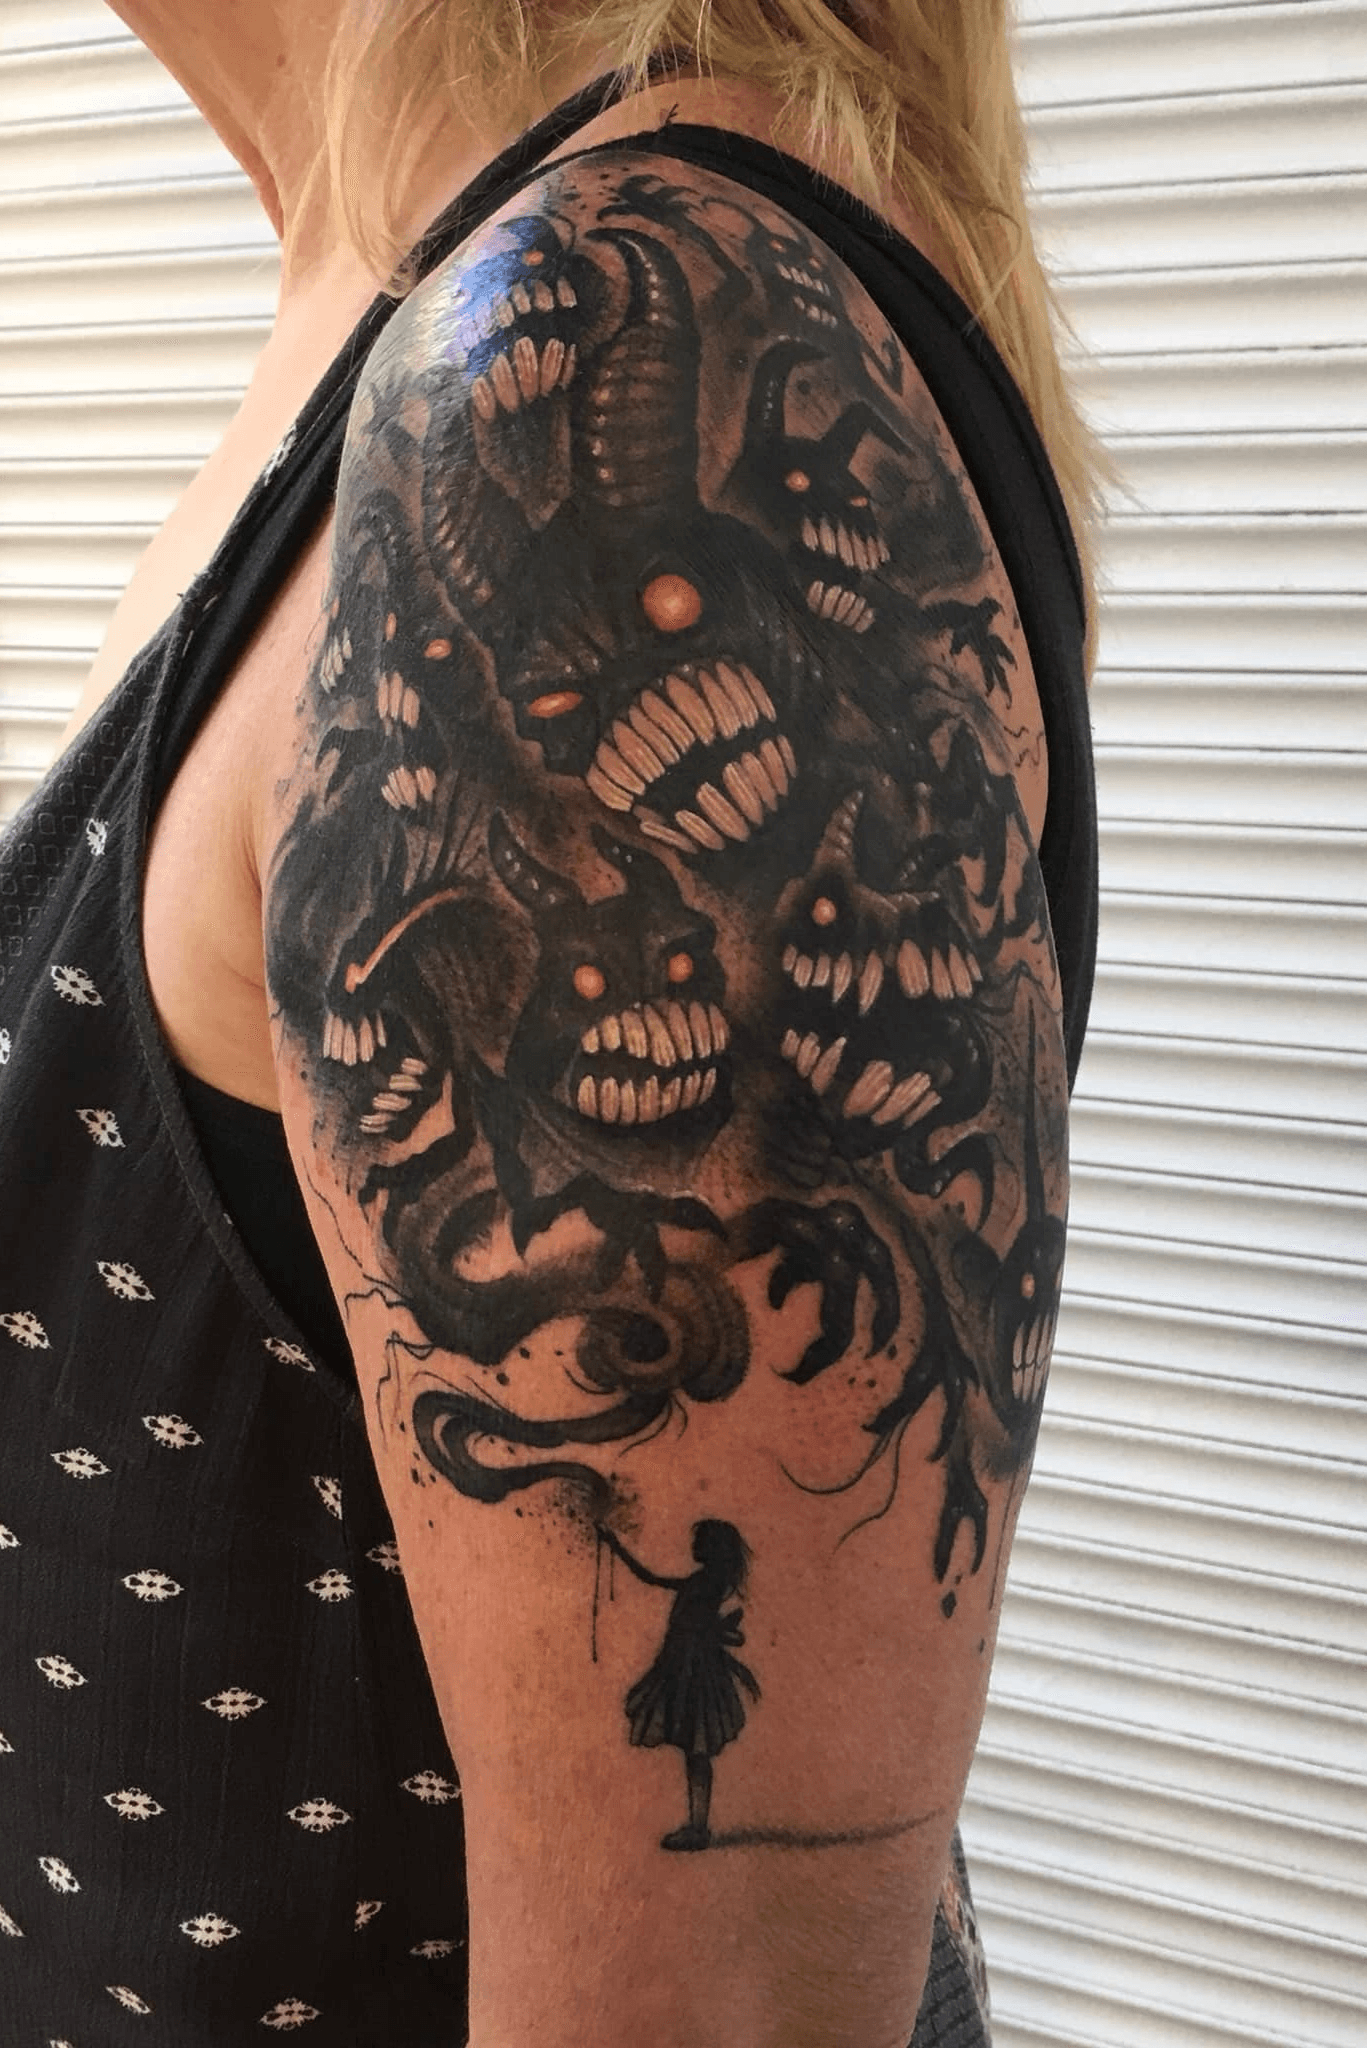 Top 20 best fantasy tattoos you must see 